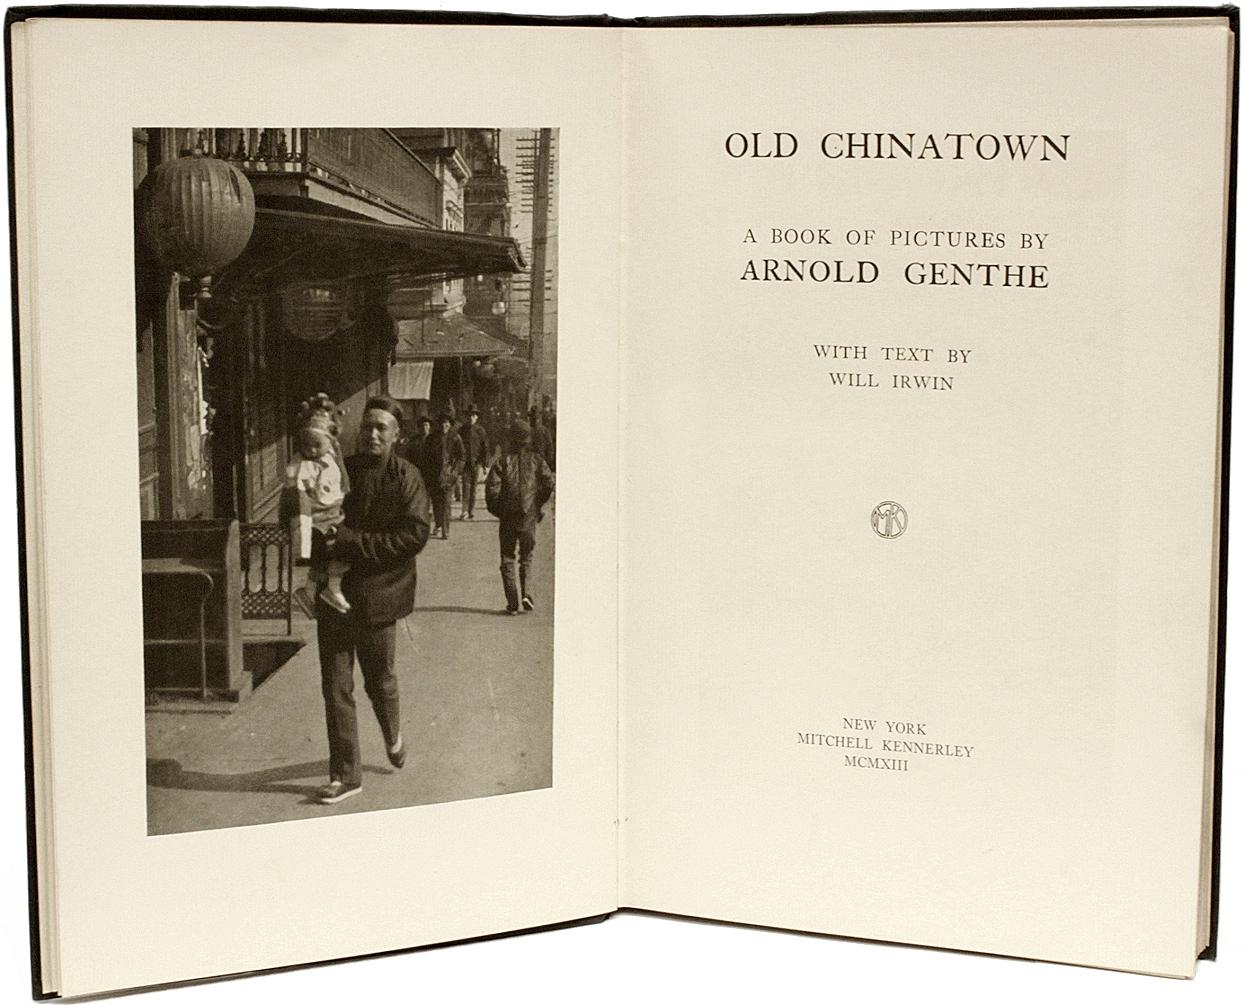 American Irwin, Will, Genthe, Arnold, Old Chinatown, 'Second Edition Enlarged - 1913' For Sale